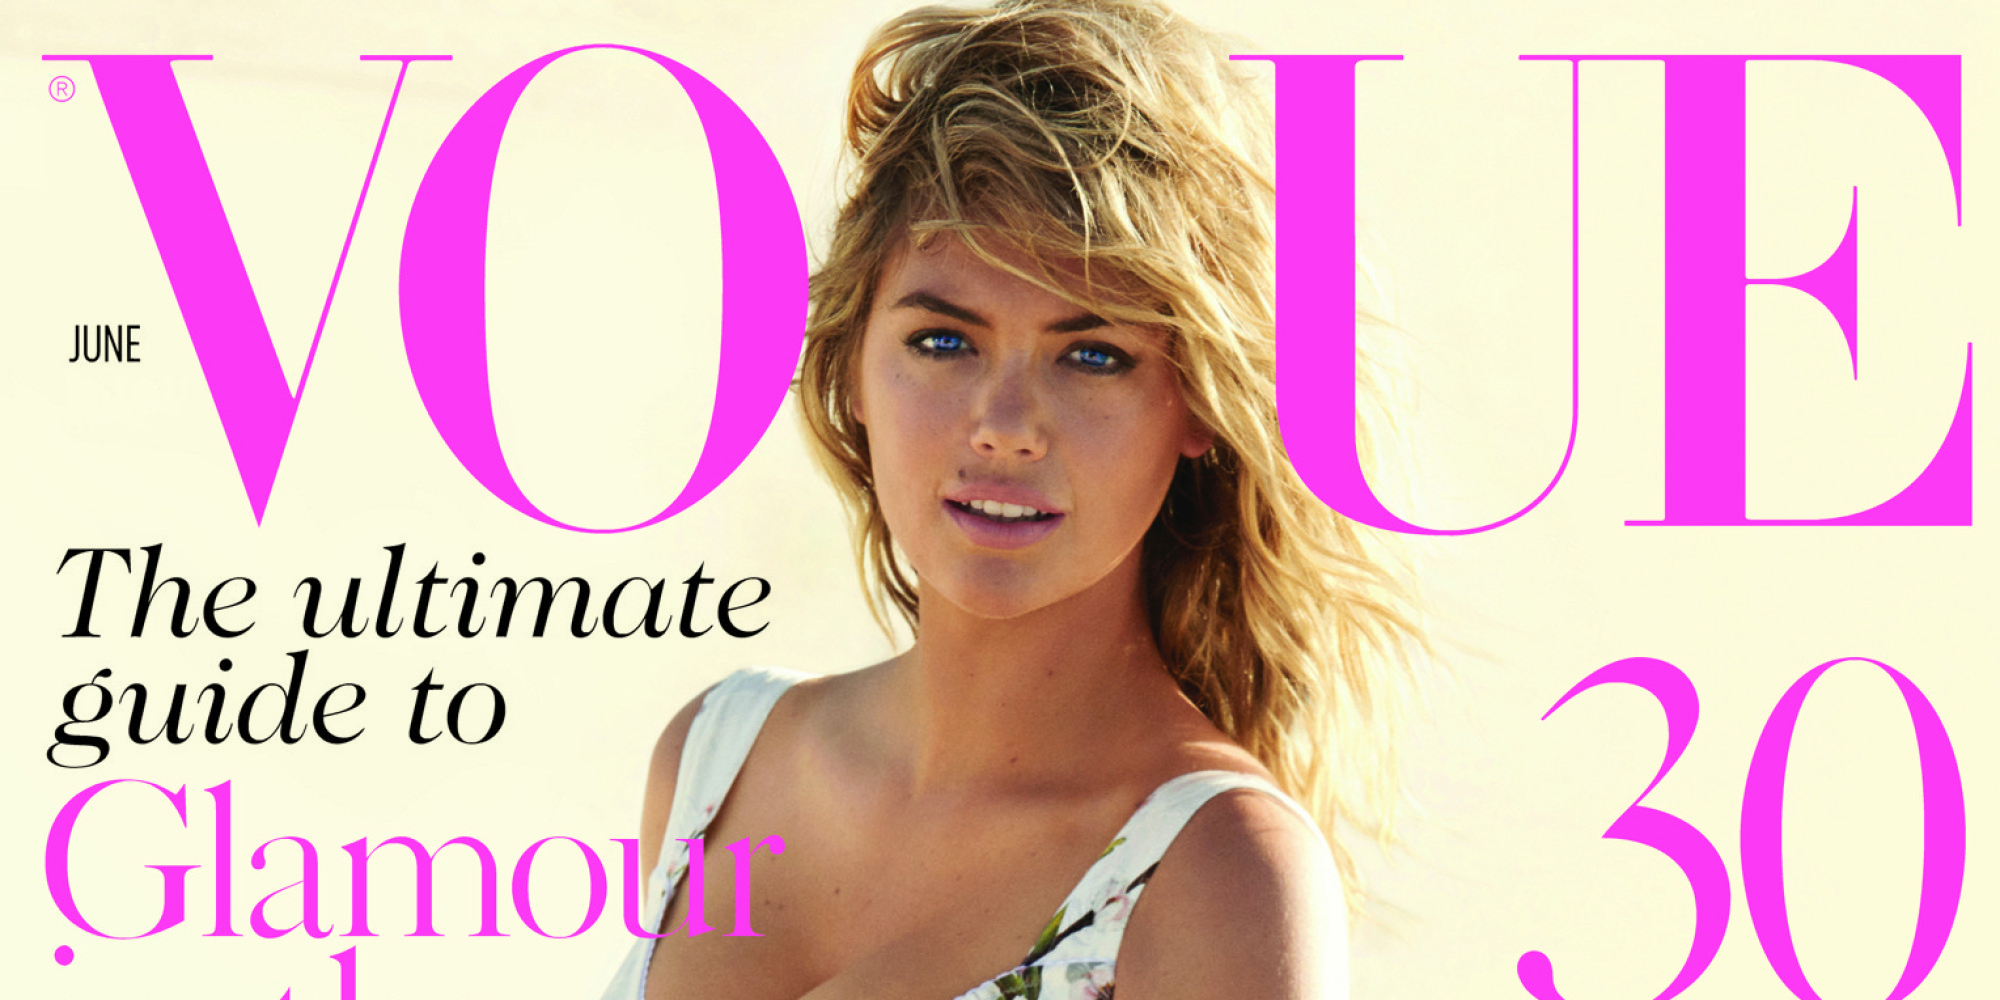 Kate Upton lands American Vogue cover - Swimsuit